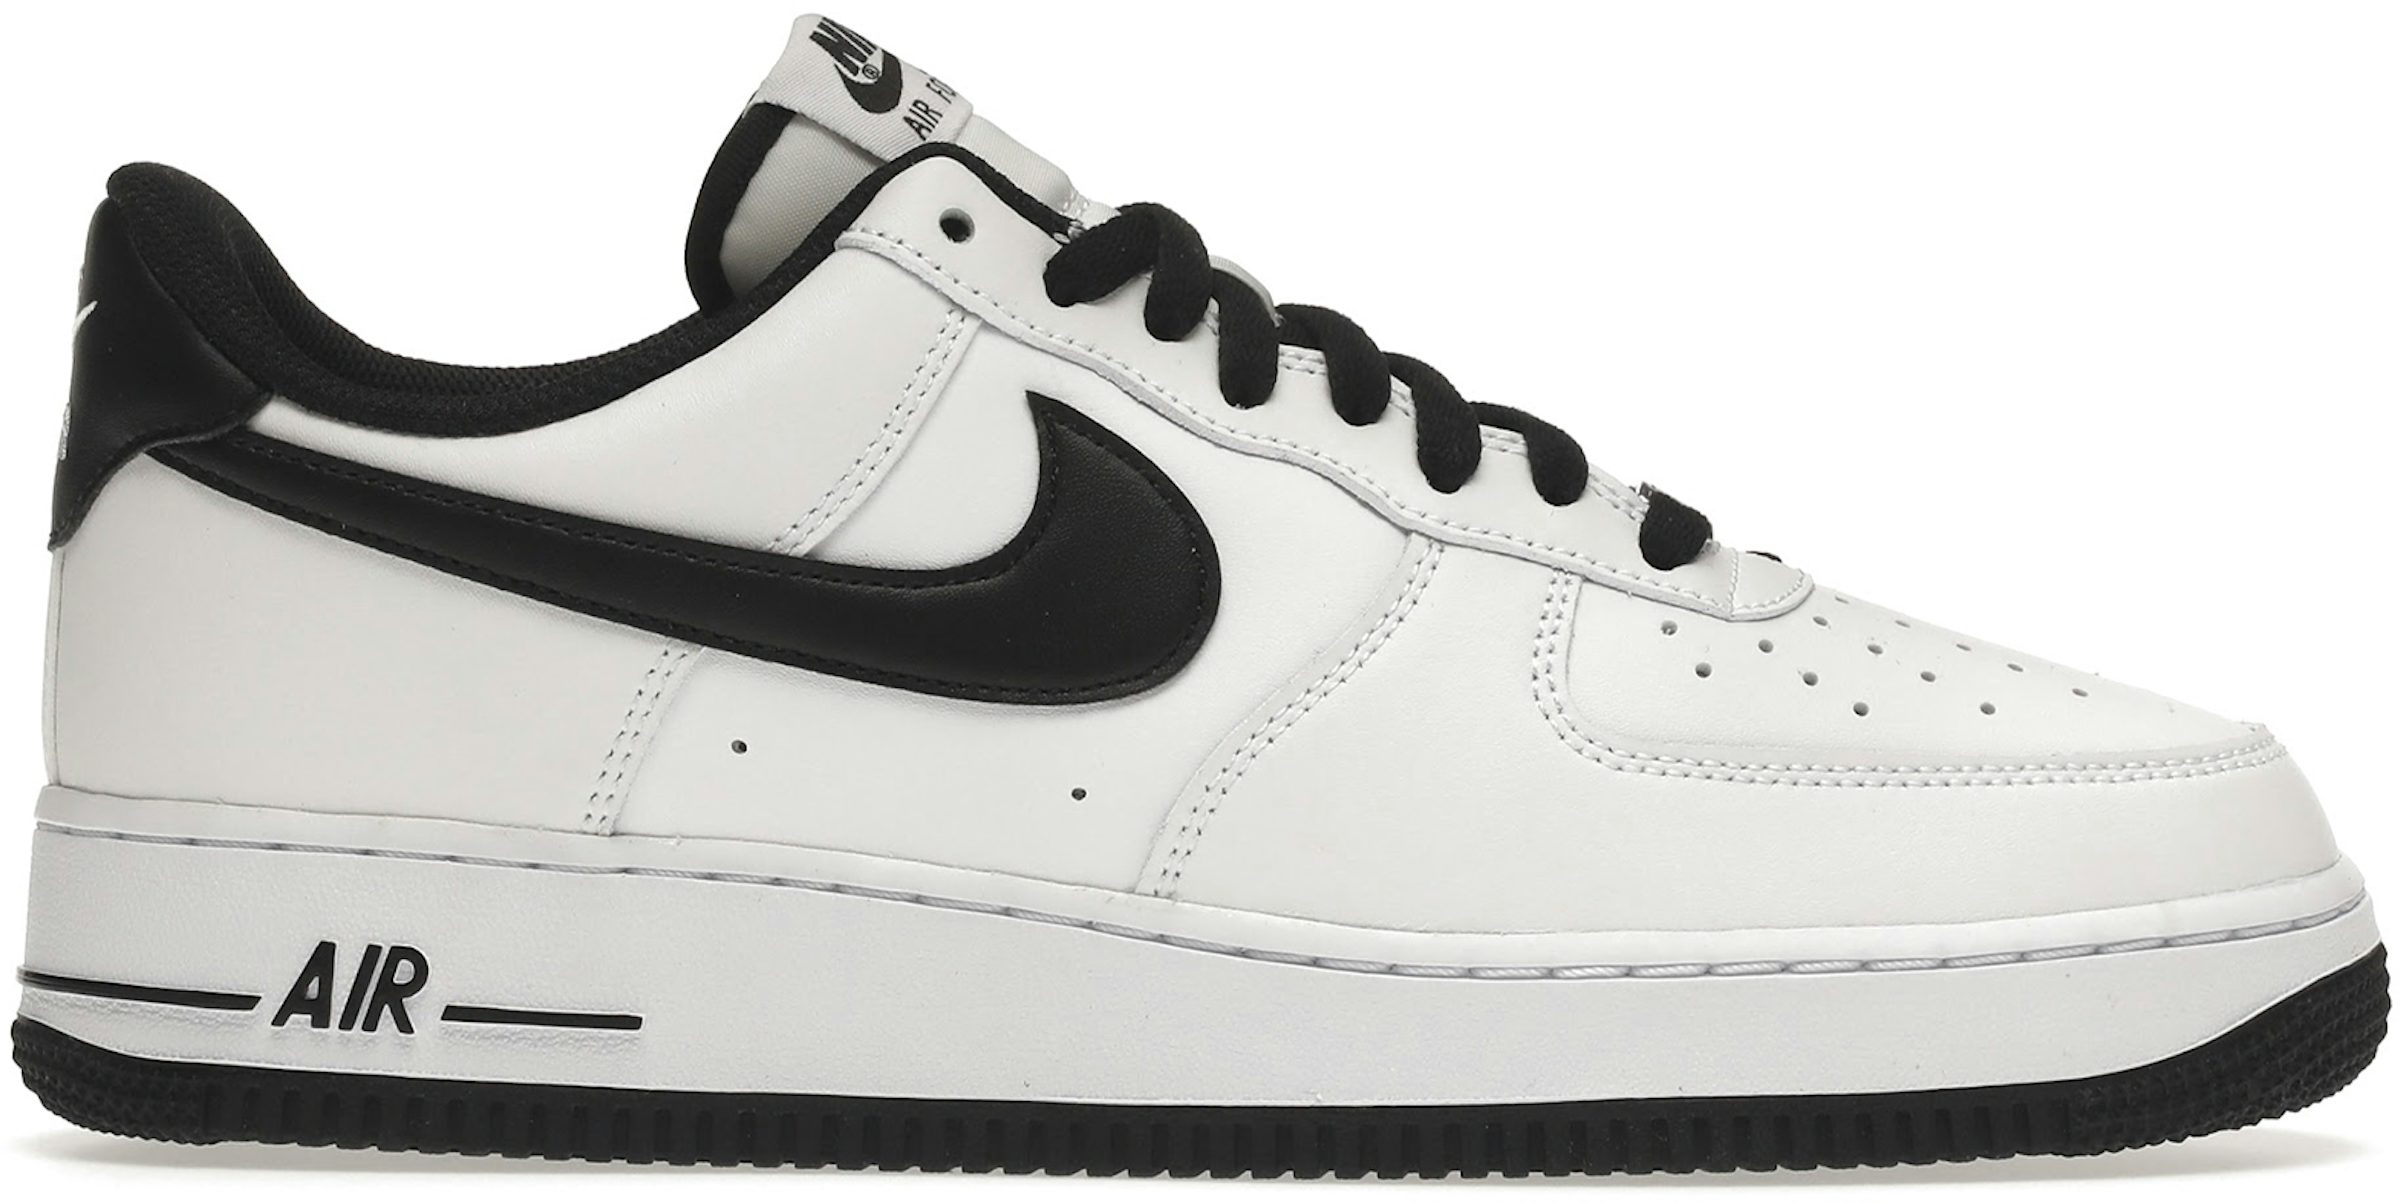 Nike Air Force 1 Low 07 / 7.5-15 / $110 Hit the streets in the